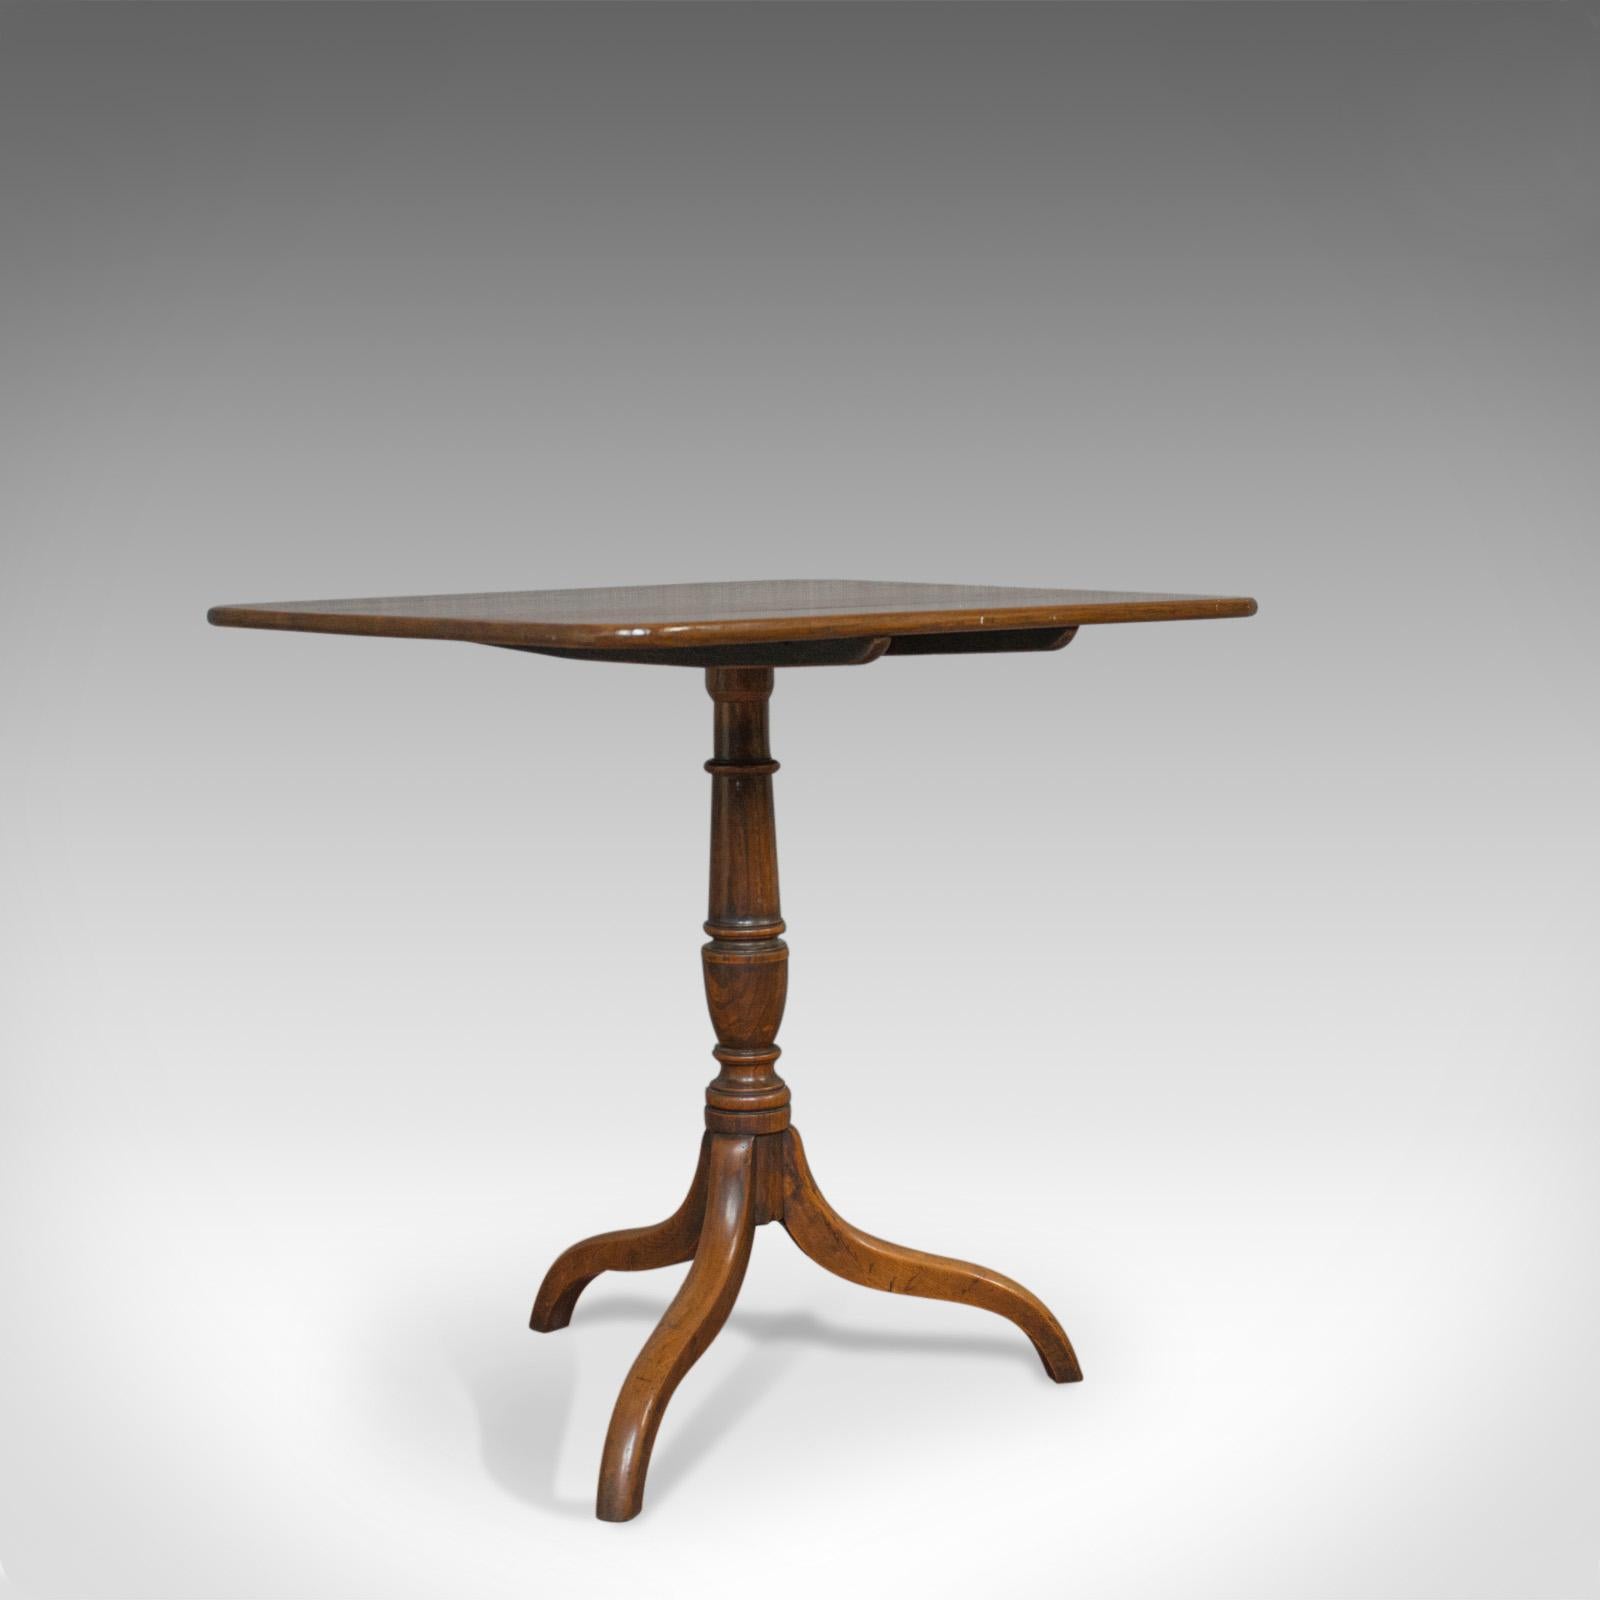 This is an antique tripod table. An English, Regency, tilt-top oak side table dating to the early 19th century, circa 1830.

Displays good consistent colour and a desirable aged patina
Select oak shows attractive grain interest and wisps of